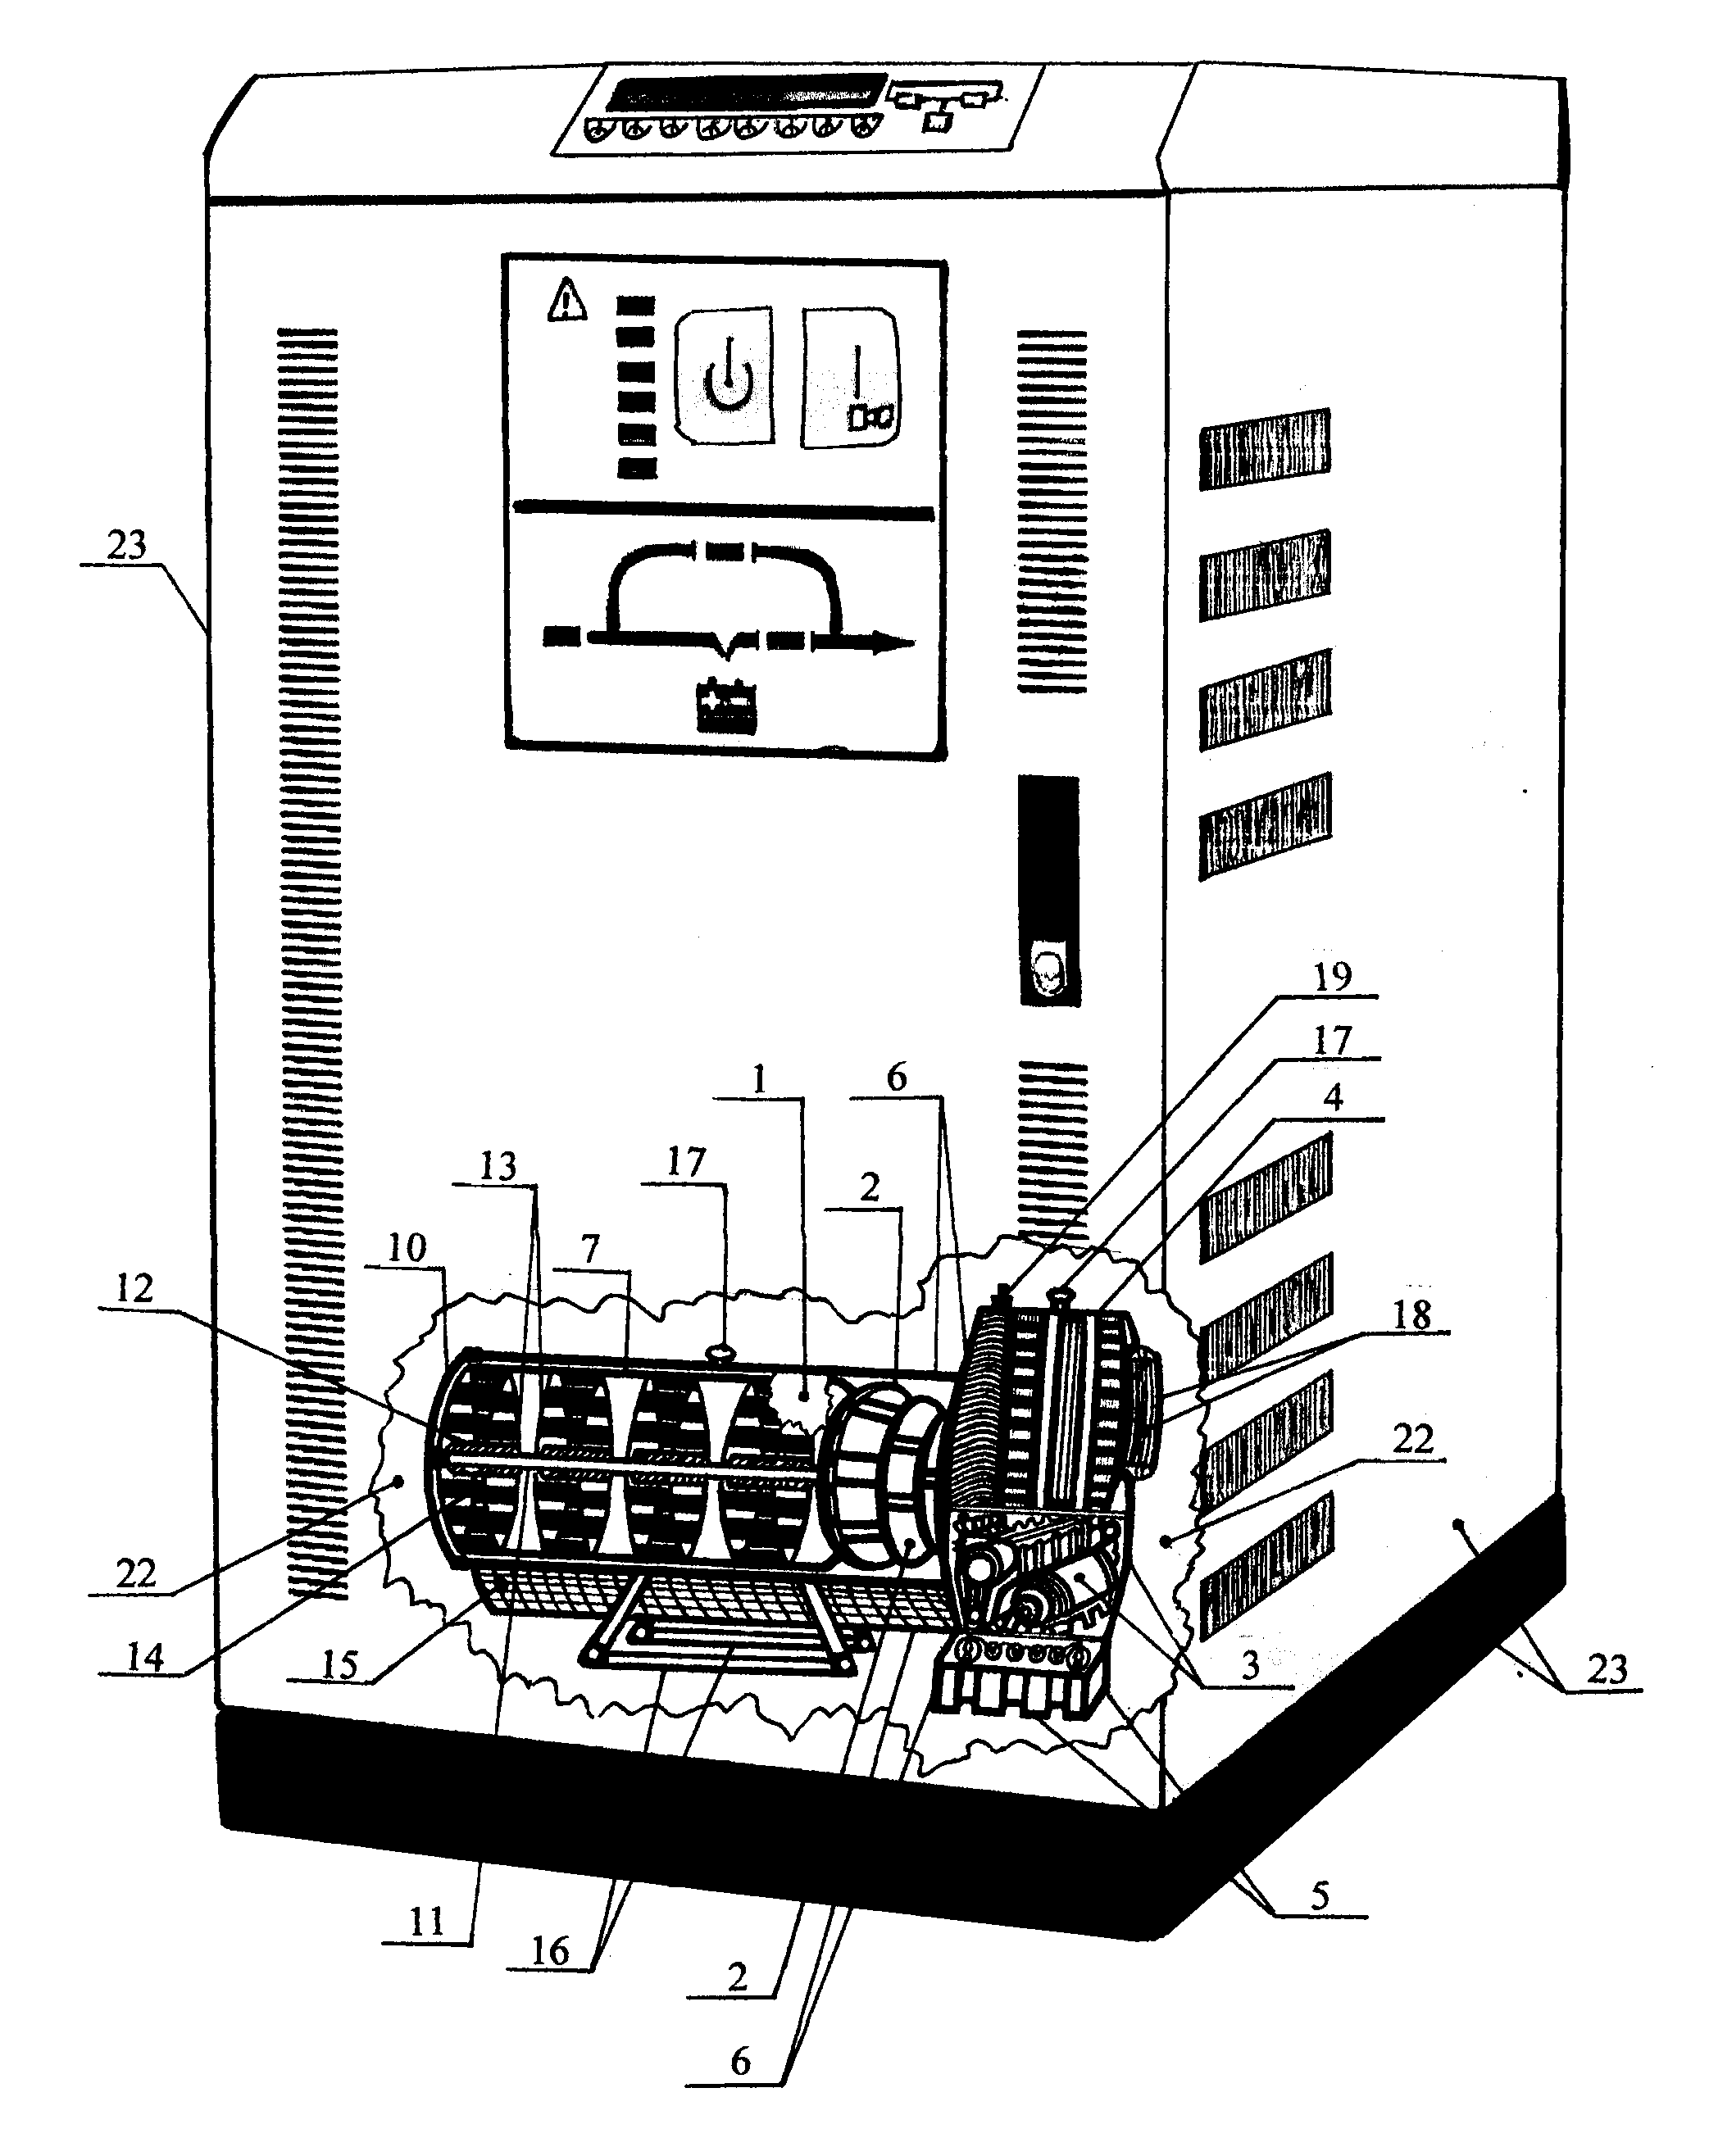 Step-force perpetual-motion electrical UPS (Uninterrupted Power Supply) system